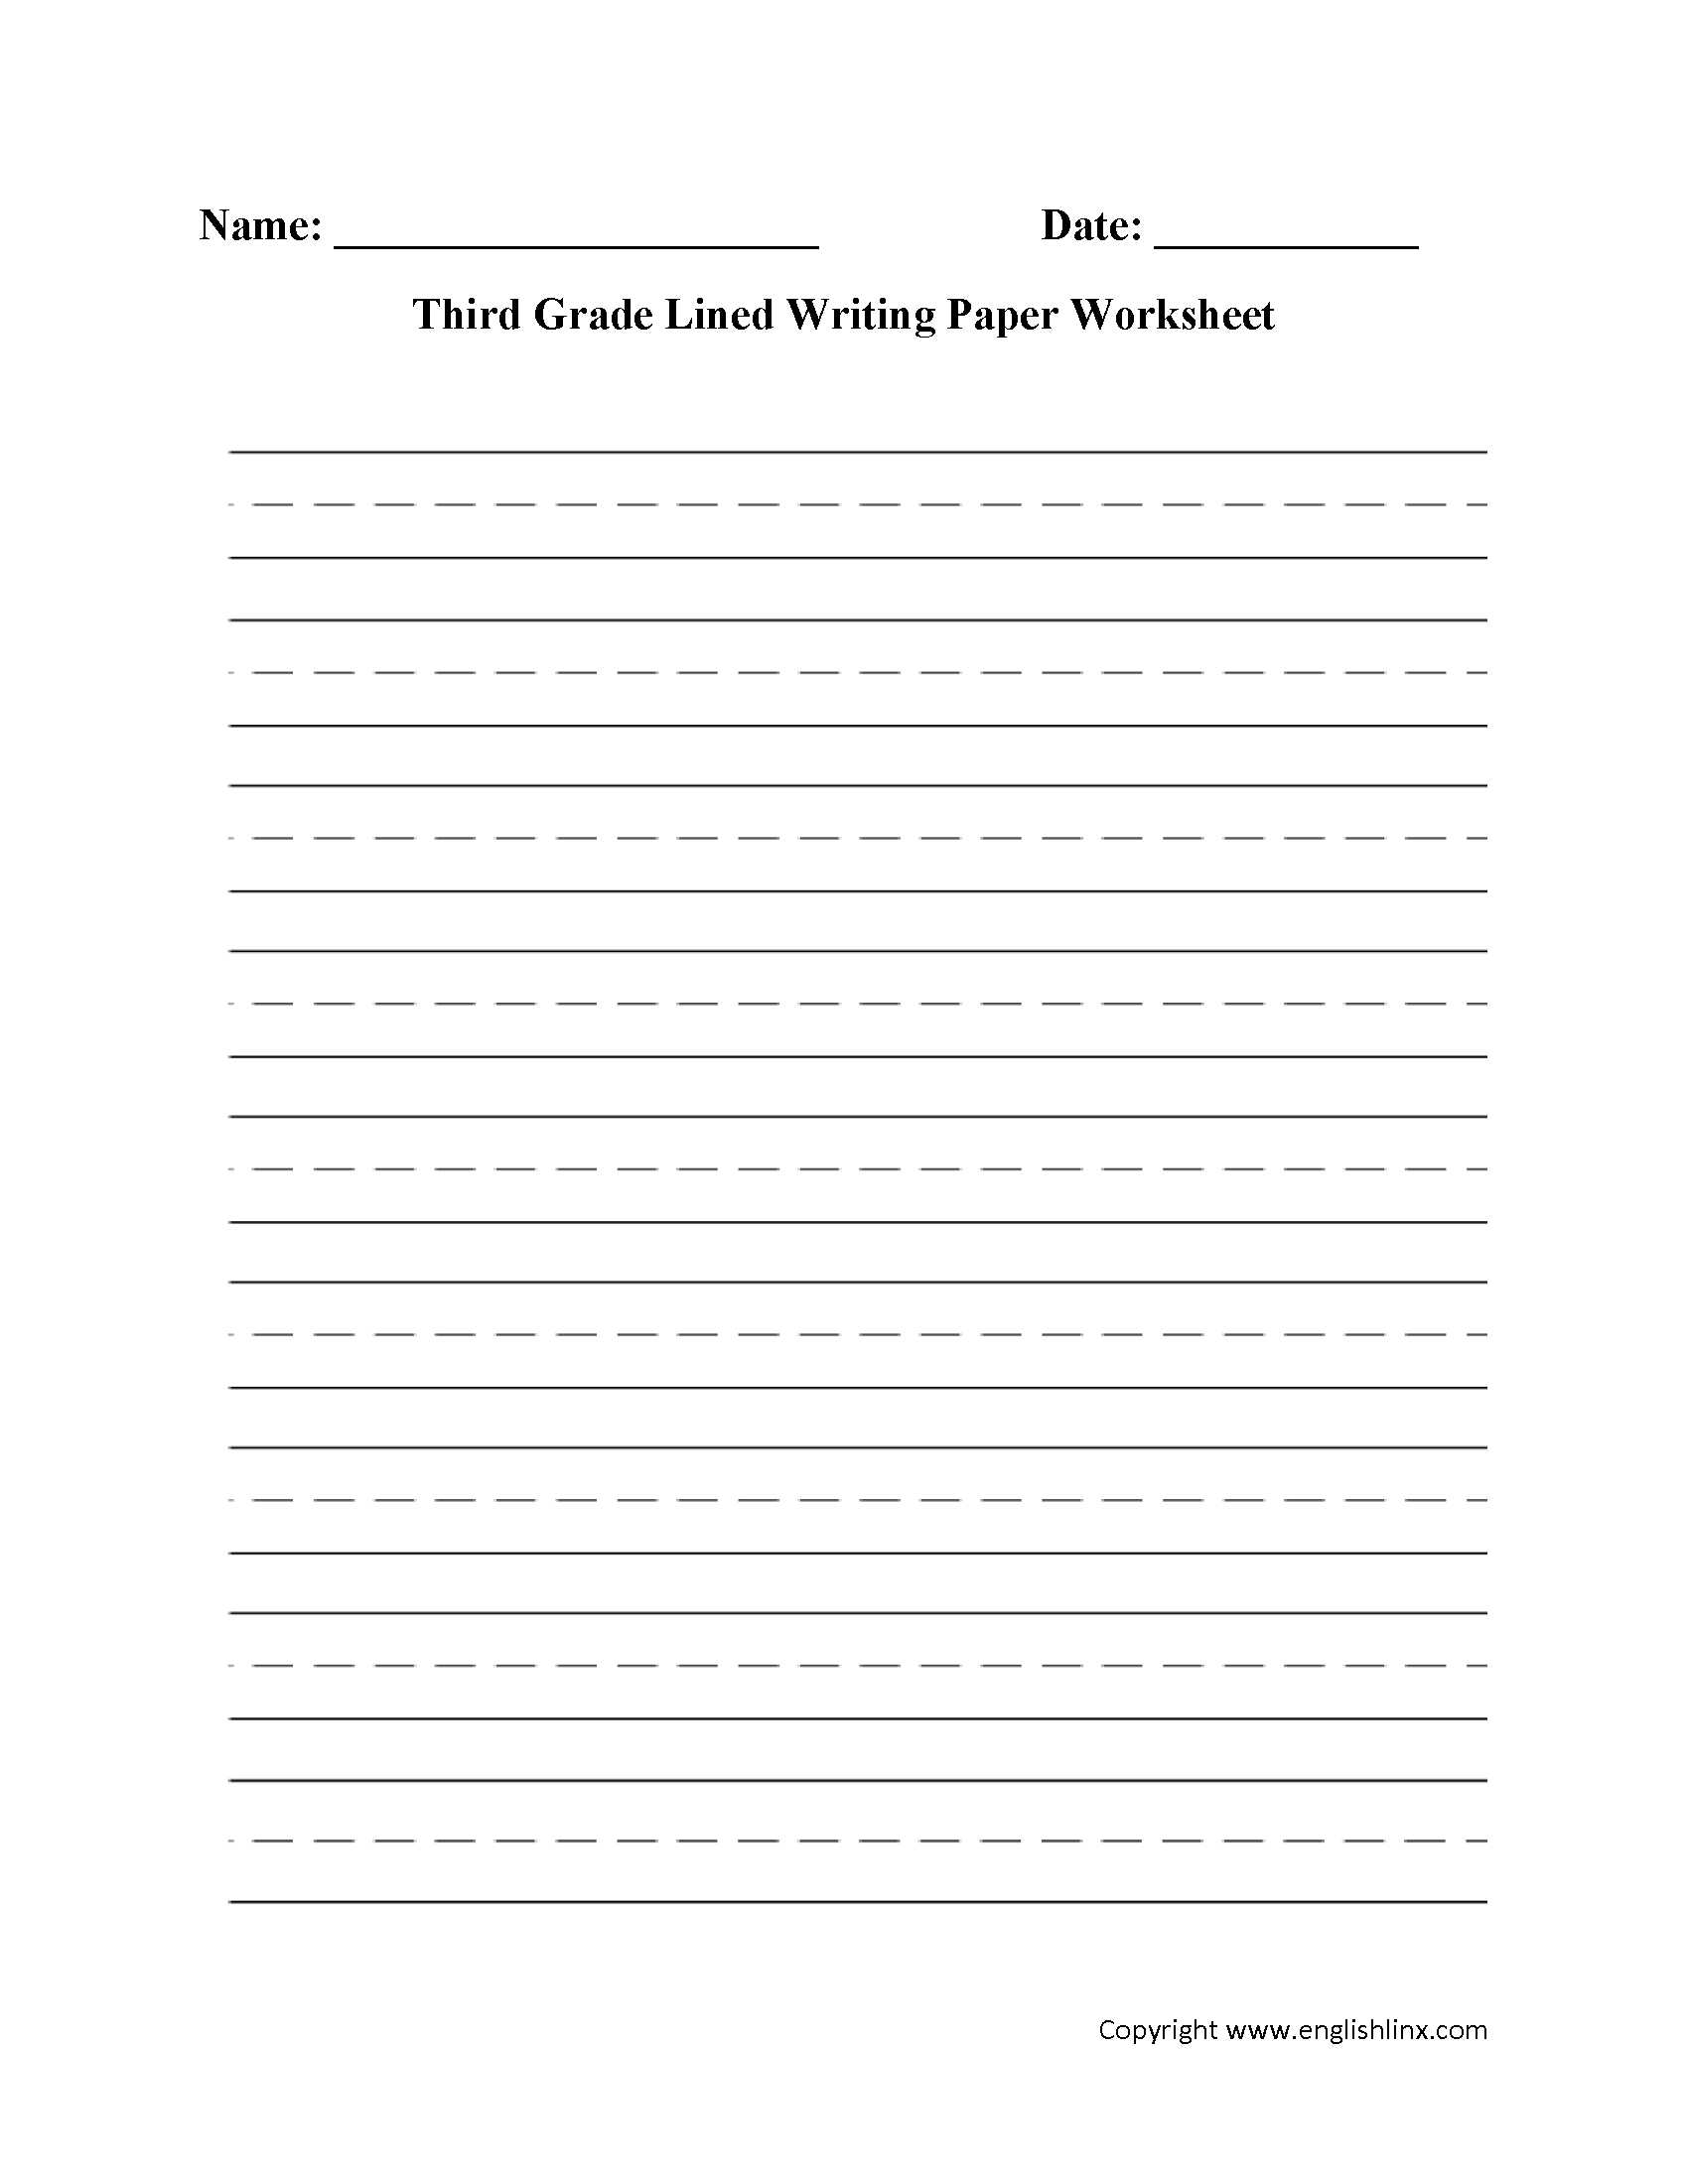 Handwriting Practice Worksheets together with Writing Paper Ozilmanoof